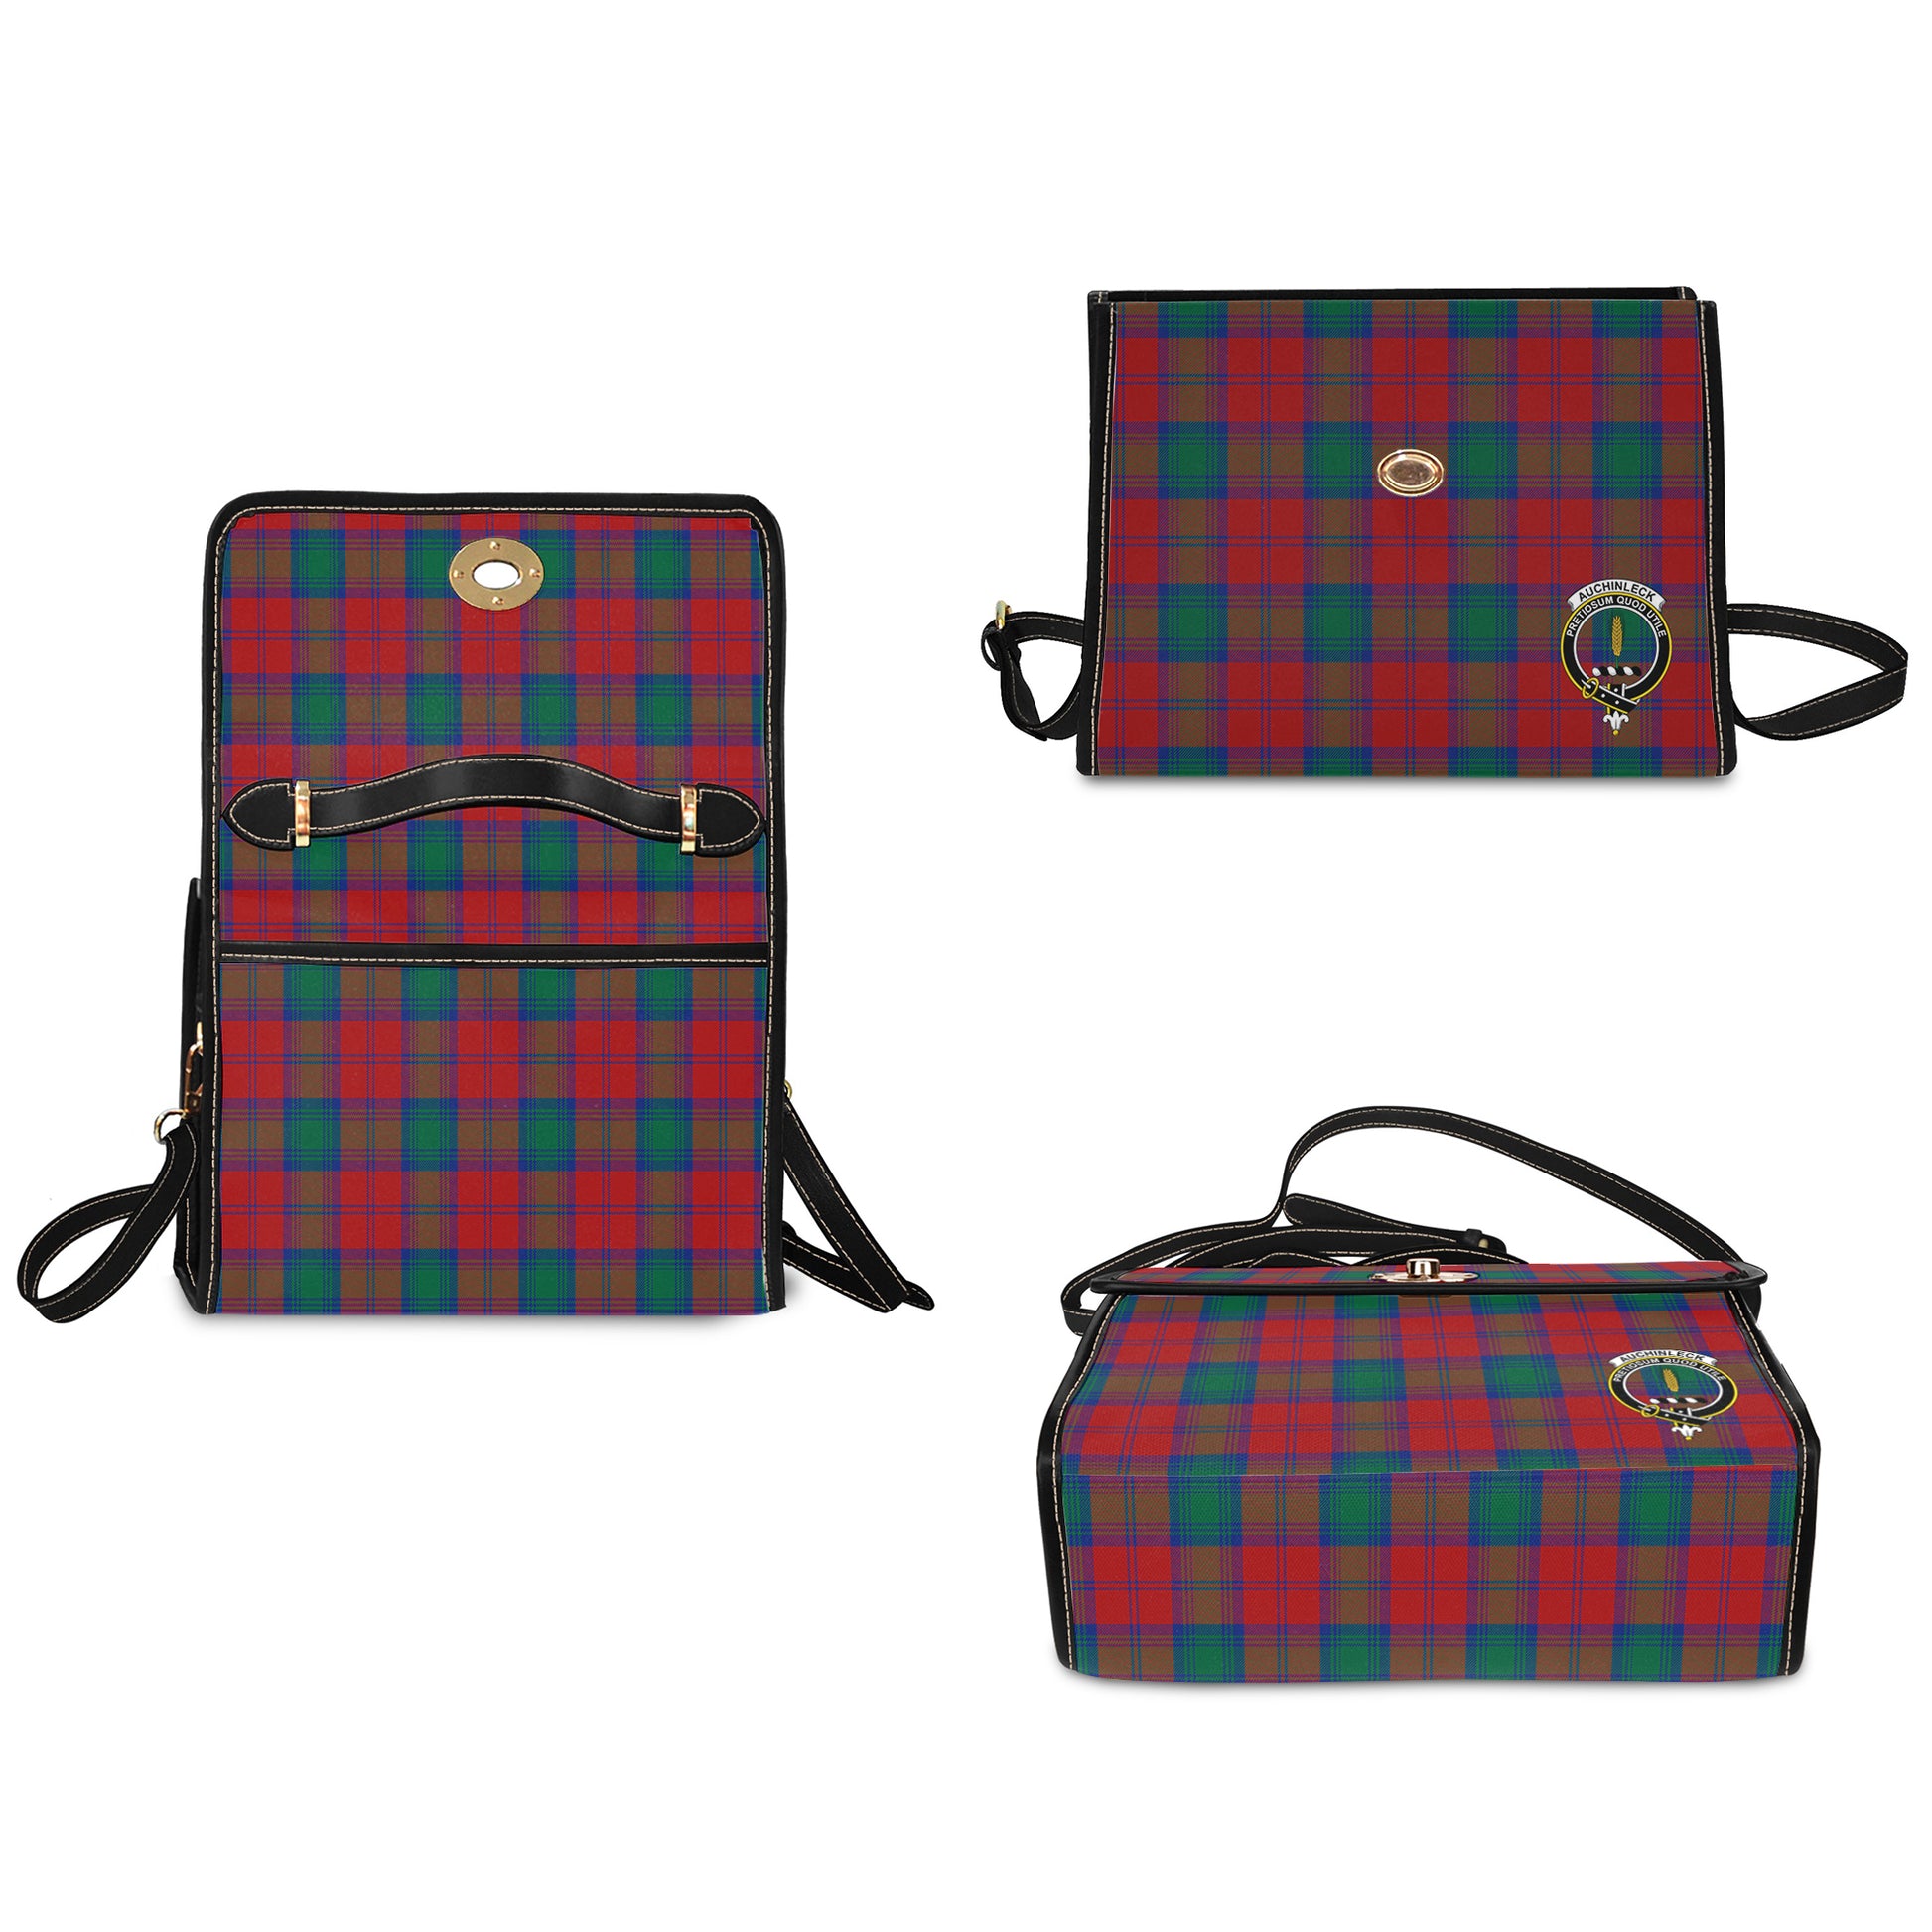 Auchinleck Tartan Leather Strap Waterproof Canvas Bag with Family Crest - Tartanvibesclothing